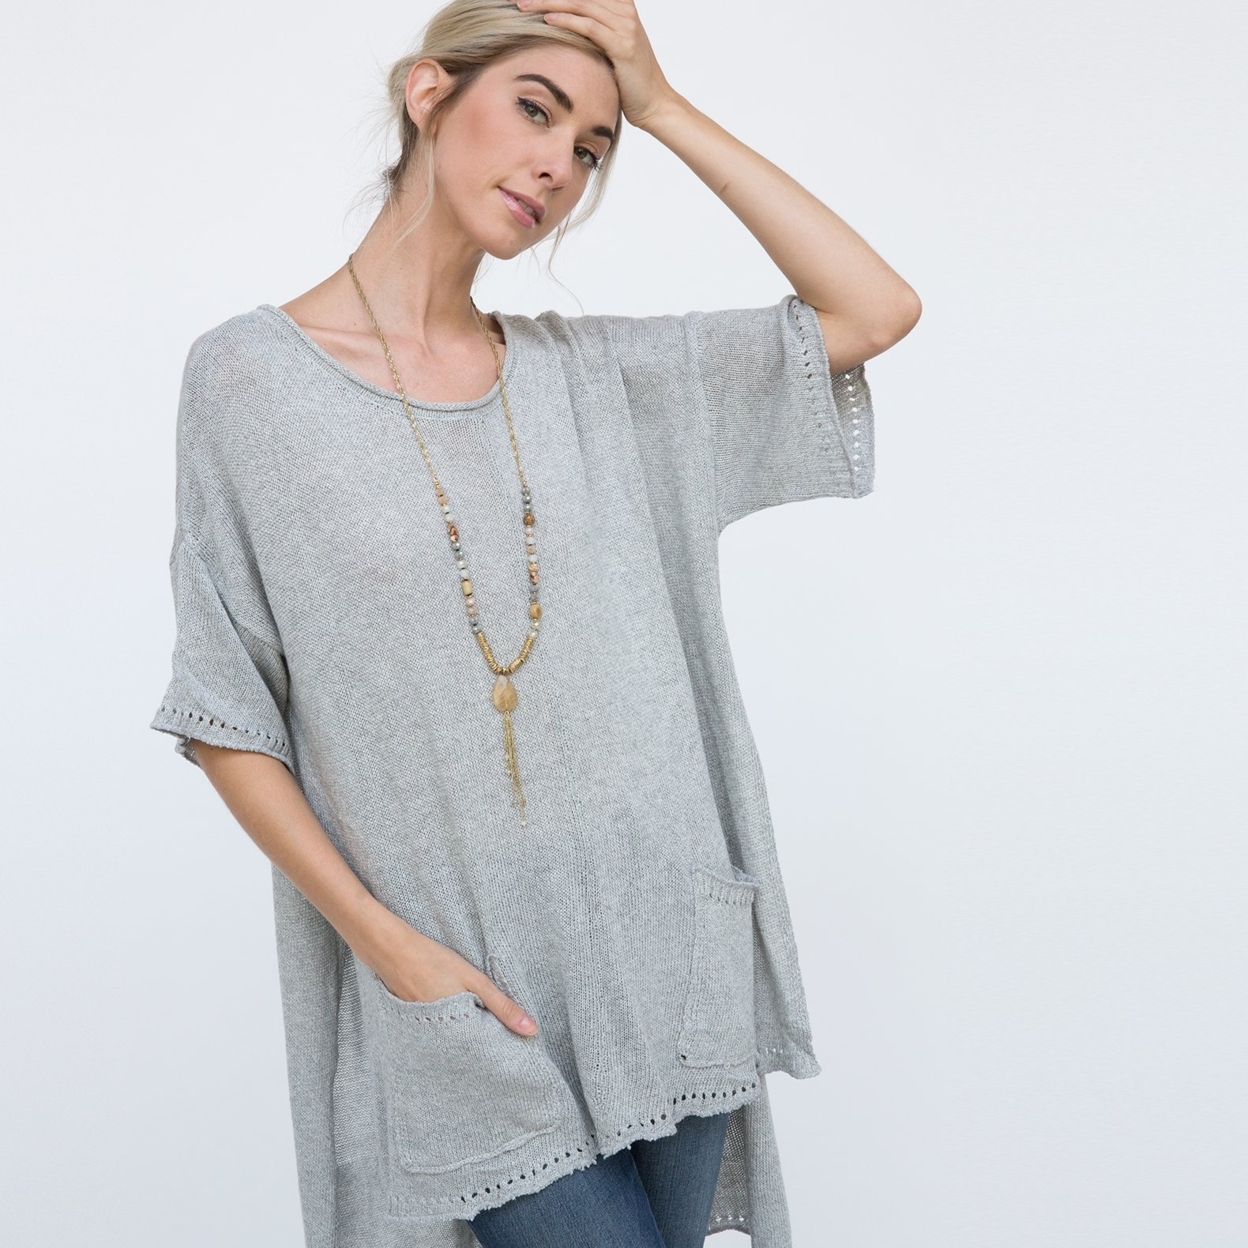 Comfy Oversize Knit Tunic - Dusty Grey, Small (2-4)